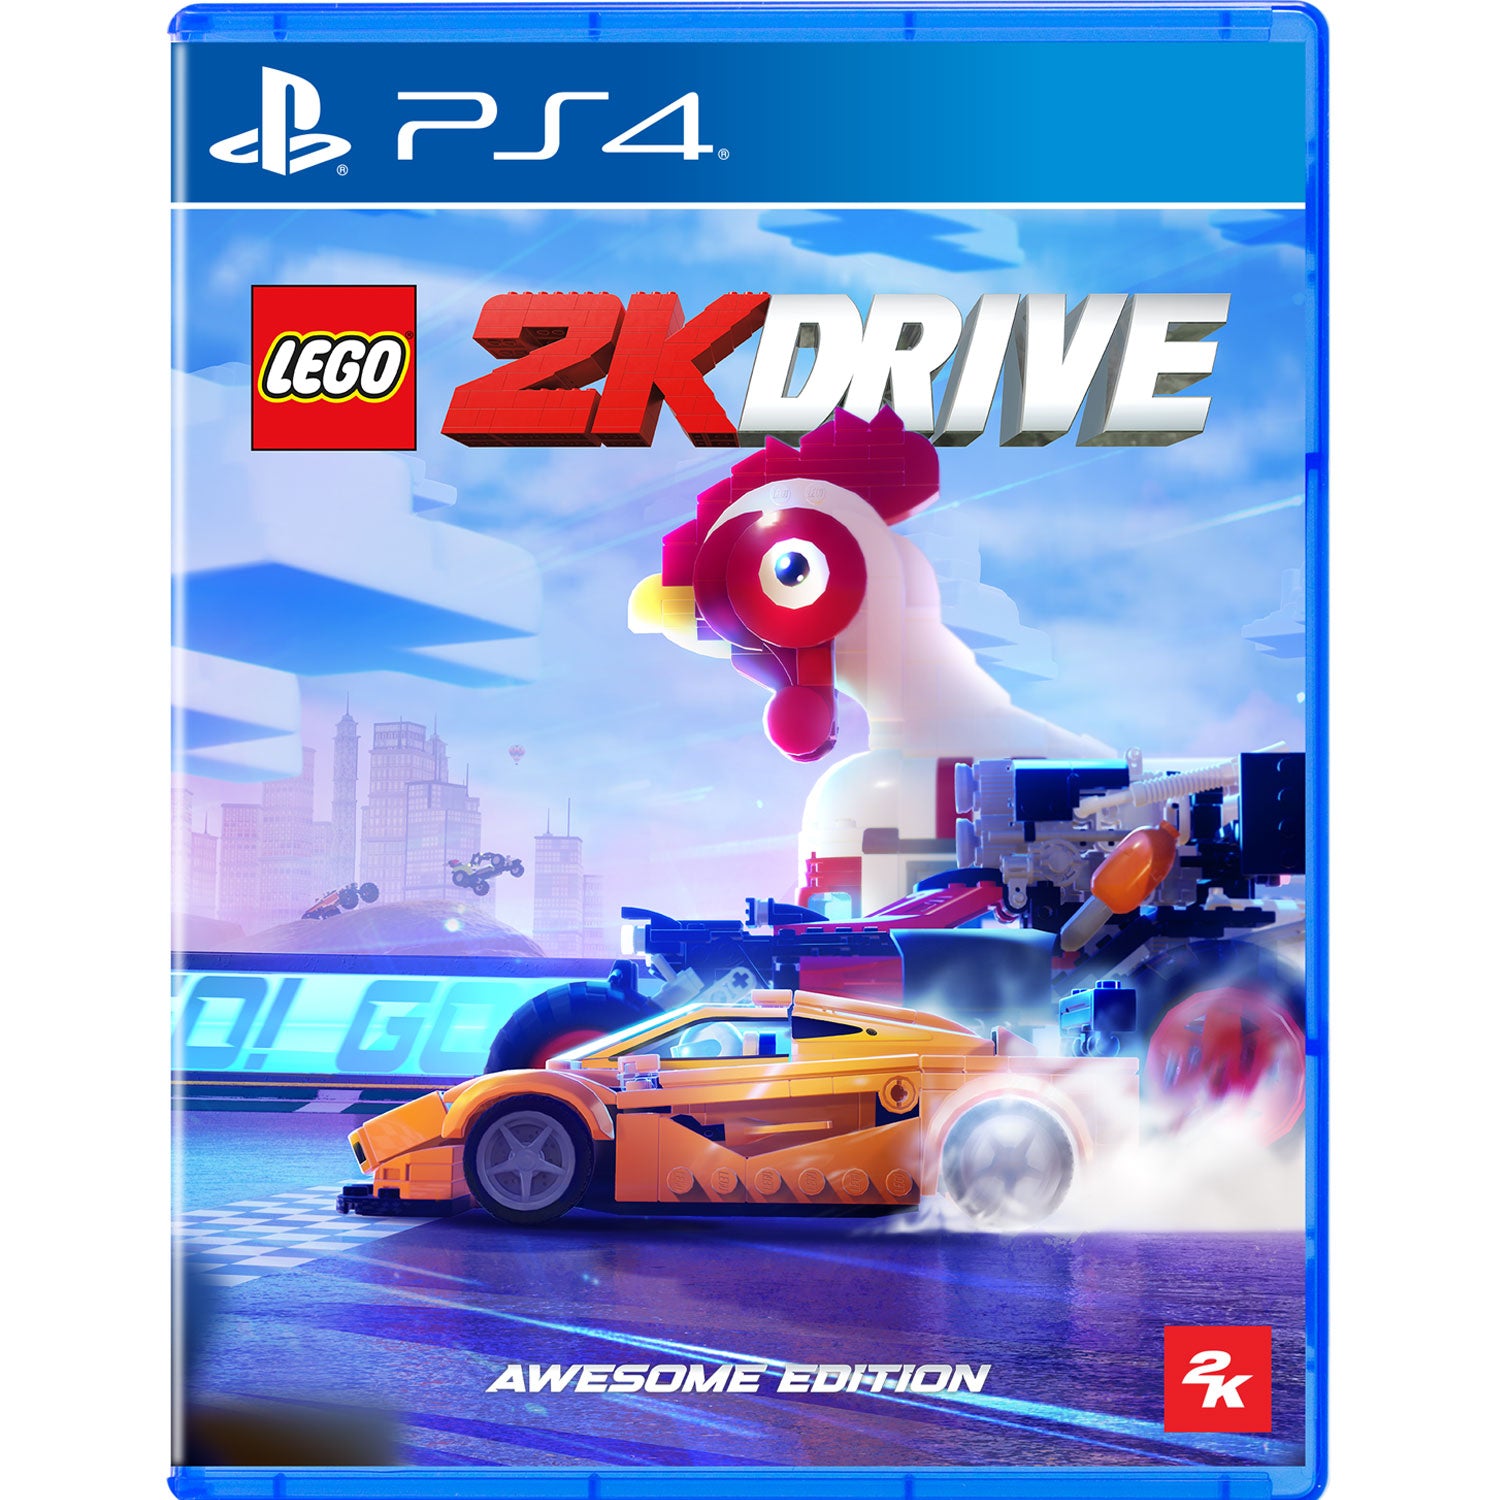 PS4 LEGO 2K Drive [Awesome Edition]